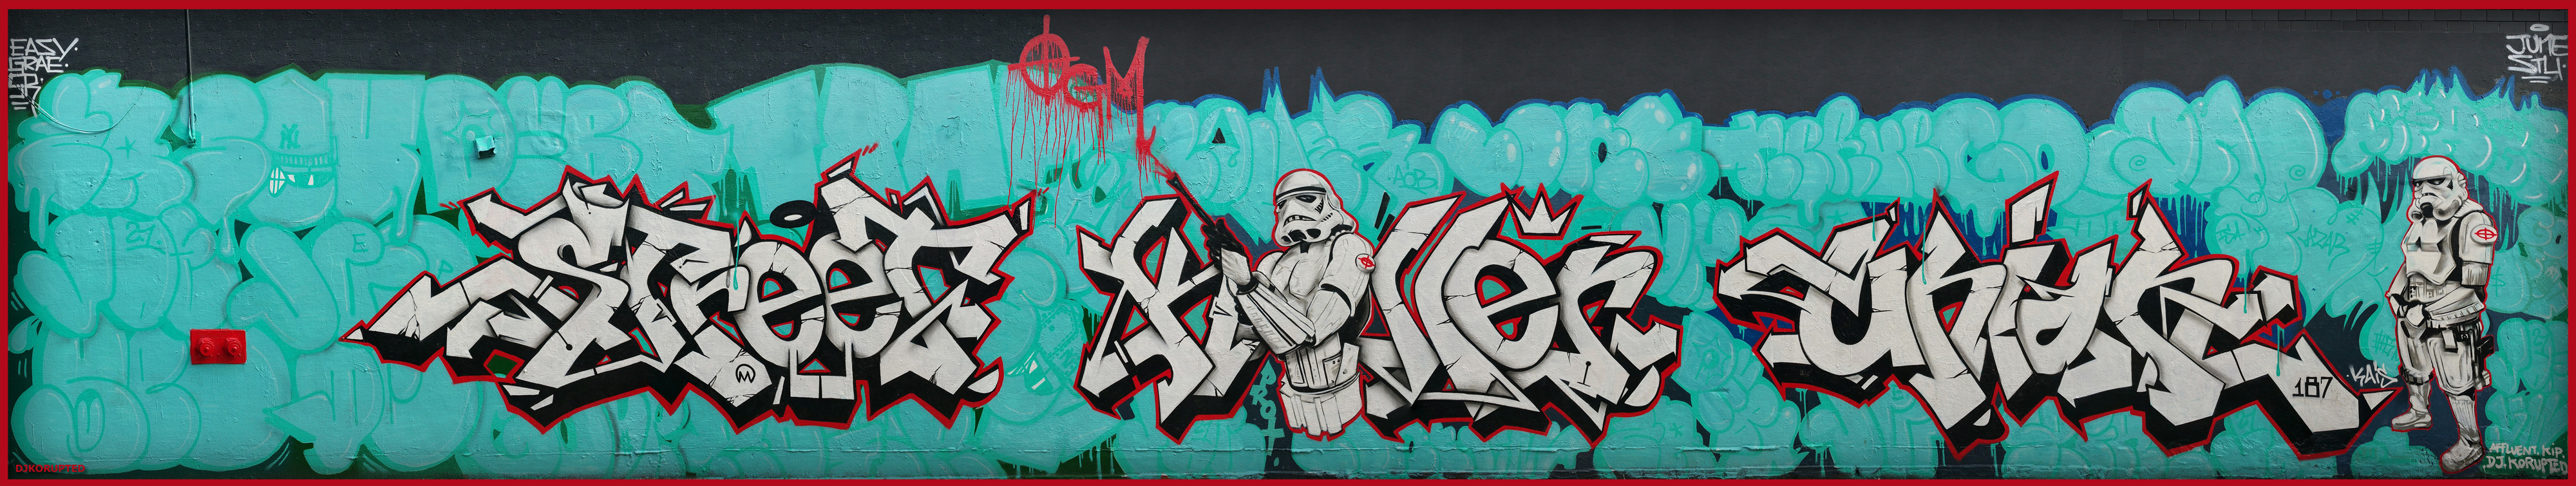 Stormtroopers Wall Production, Uptown NYC, 2014.